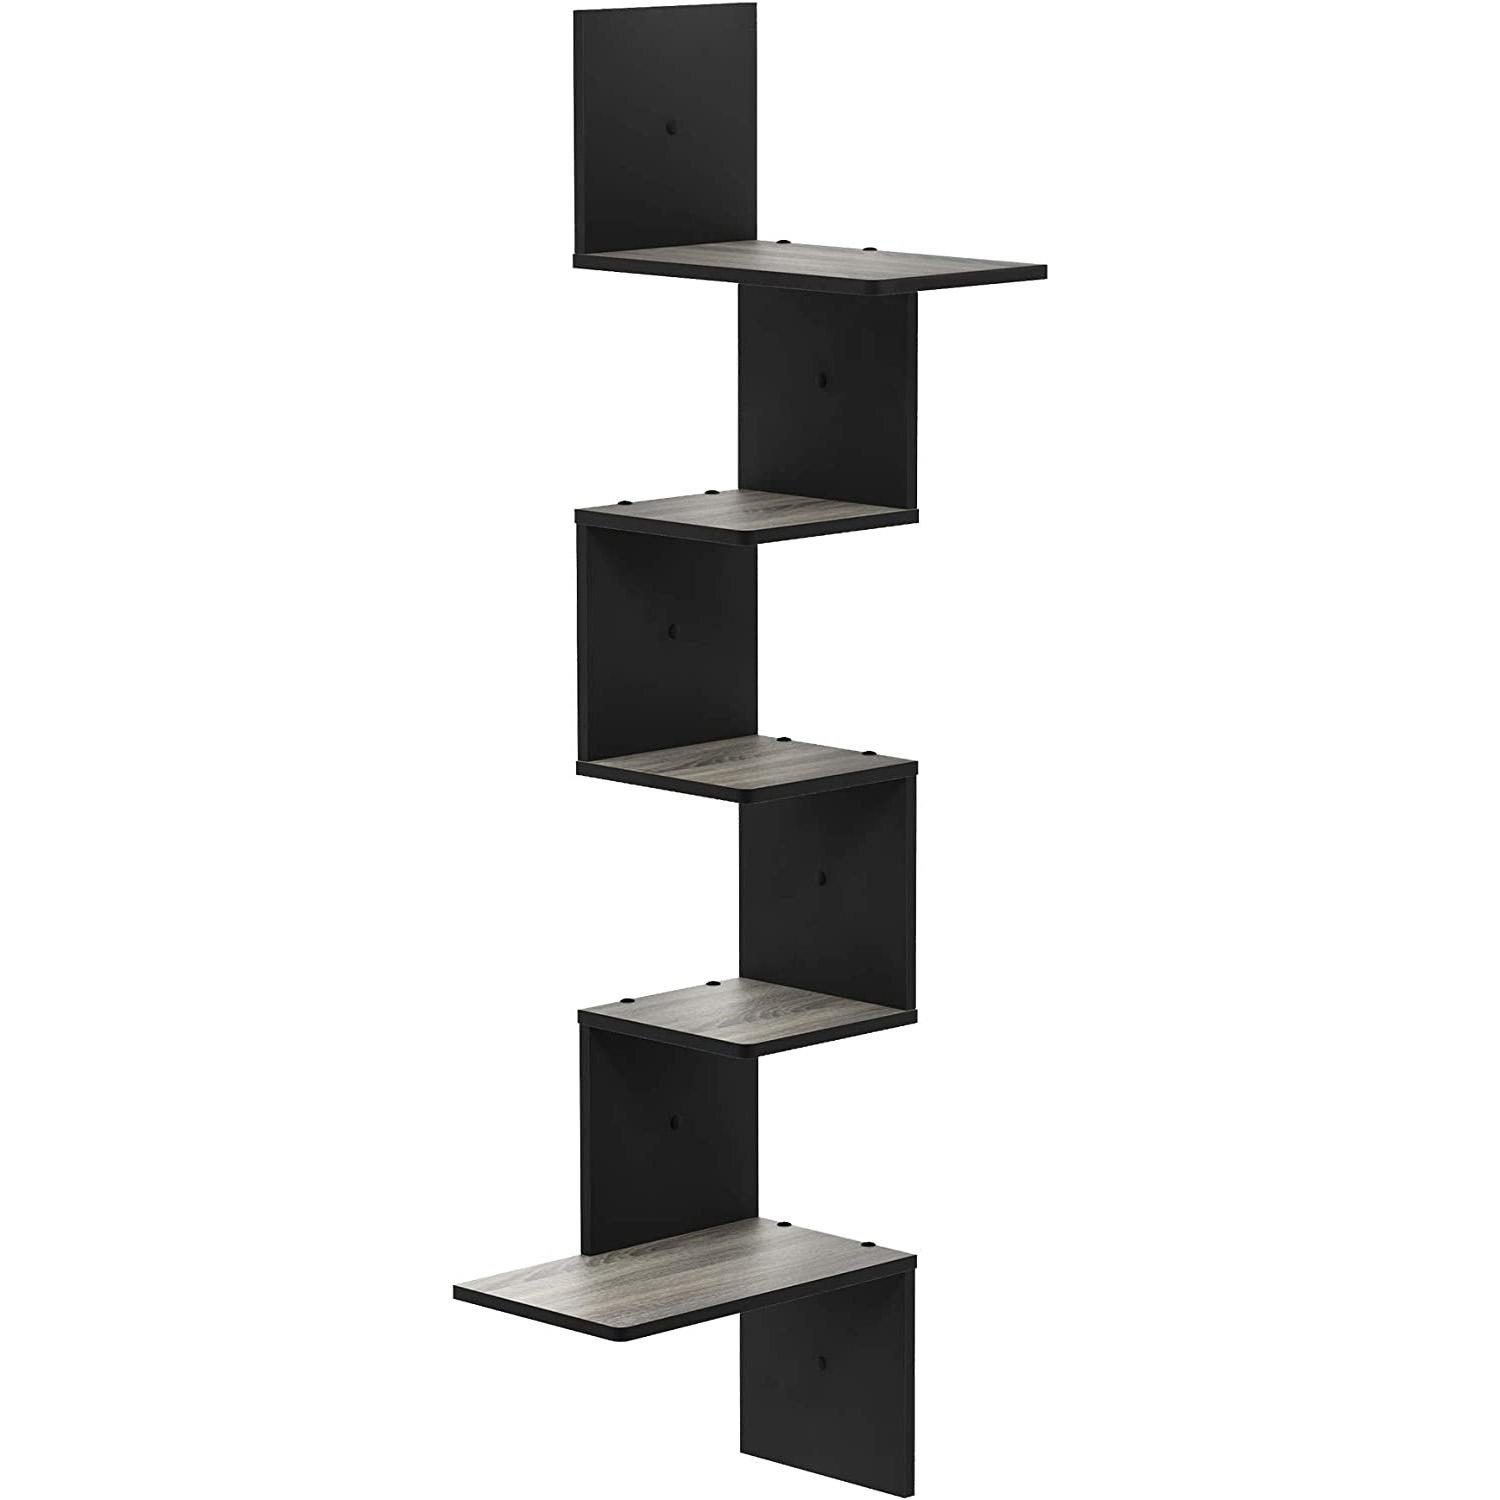 5-Tier Furinno Rossi Wall Mounted Shelves for $14.83